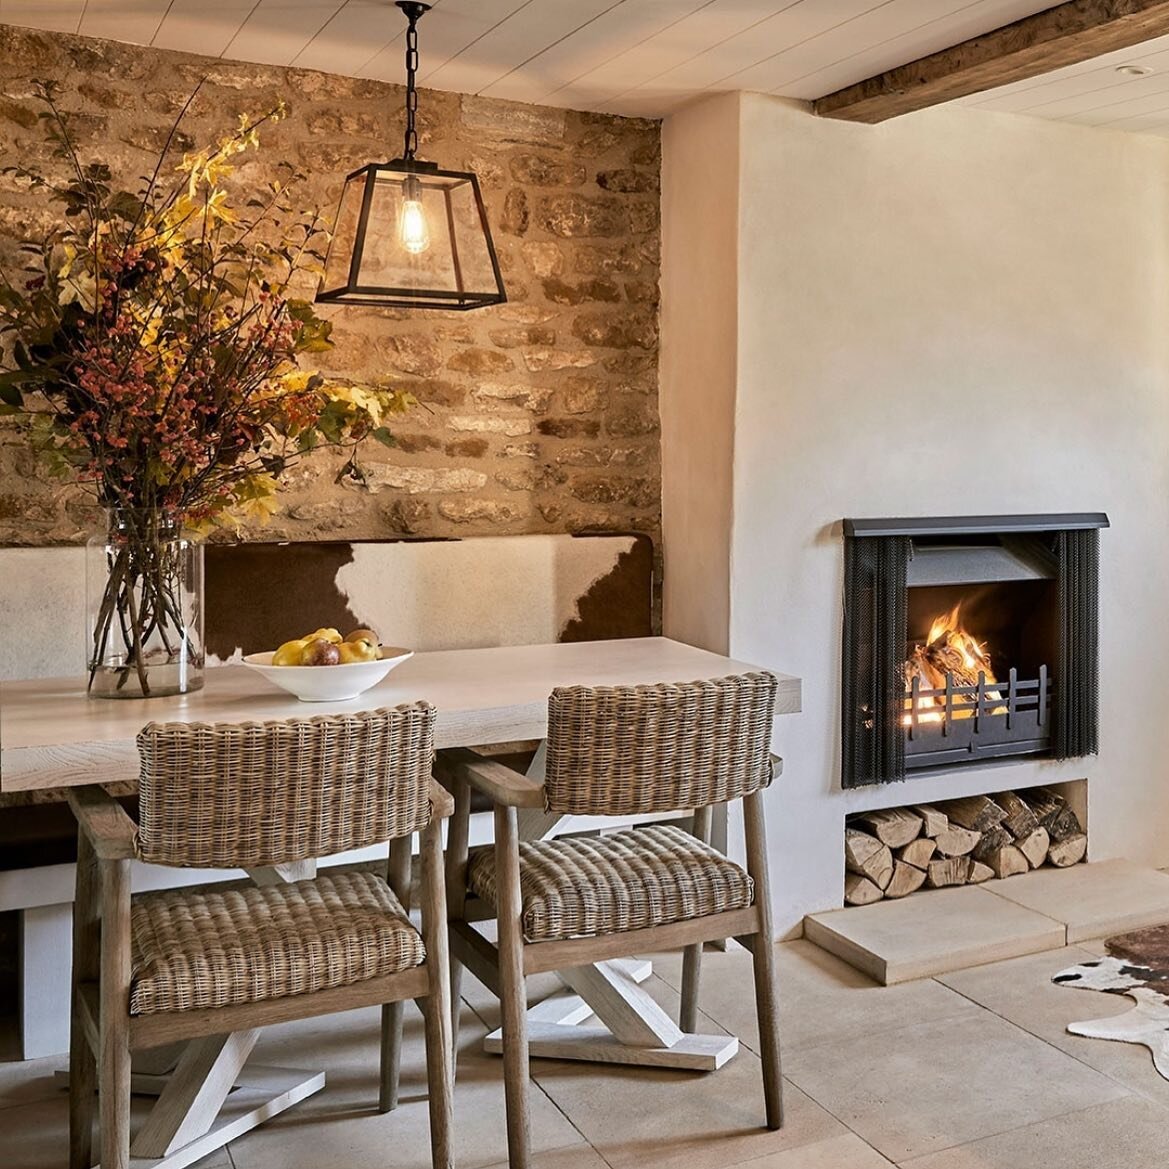 Beautiful and so cosy @thewildrabbitkingham 
.
.
.
#country #cotswolds #hotels #inspo #countryinteriors #cotswoldhome #design #designer #interiors #interior #style #interiorstyling #countryliving